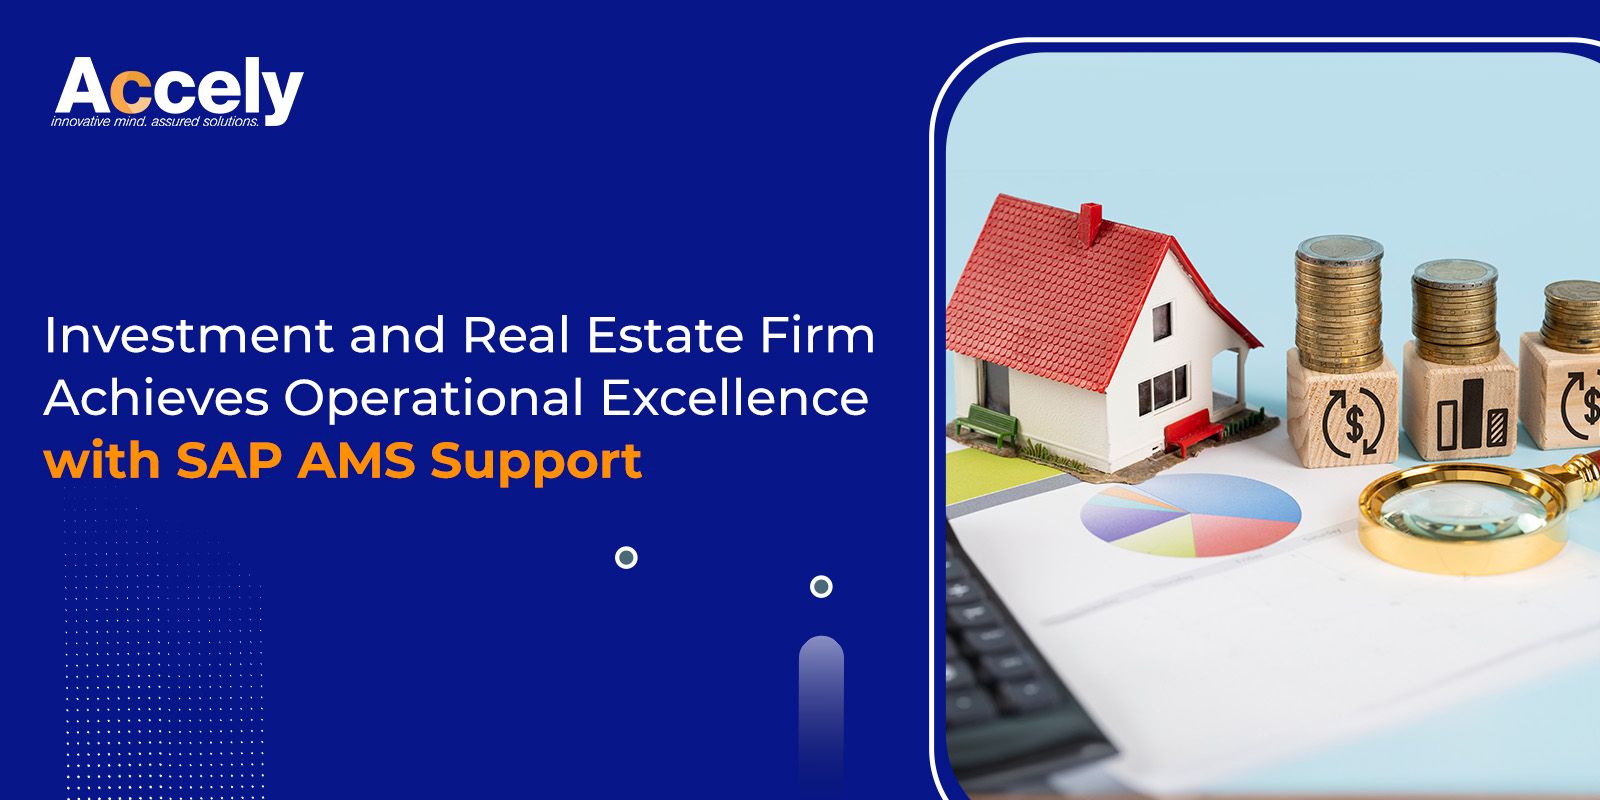 Investment and Real Estate Firm Achieves Operational Excellence with SAP AMS Support